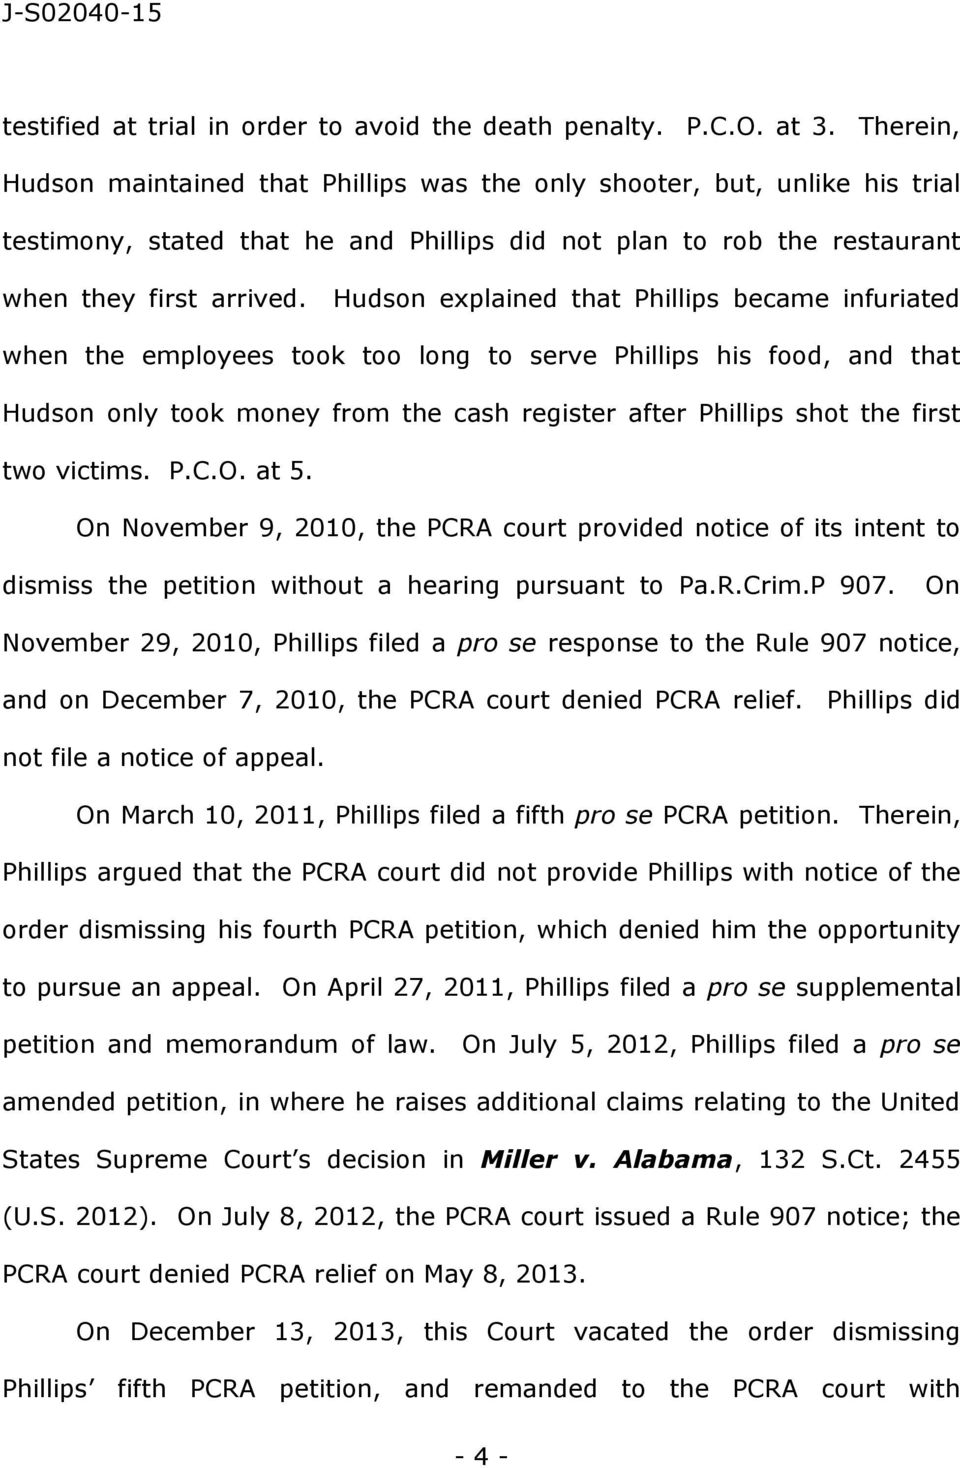 Hudson explained that Phillips became infuriated when the employees took too long to serve Phillips his food, and that Hudson only took money from the cash register after Phillips shot the first two